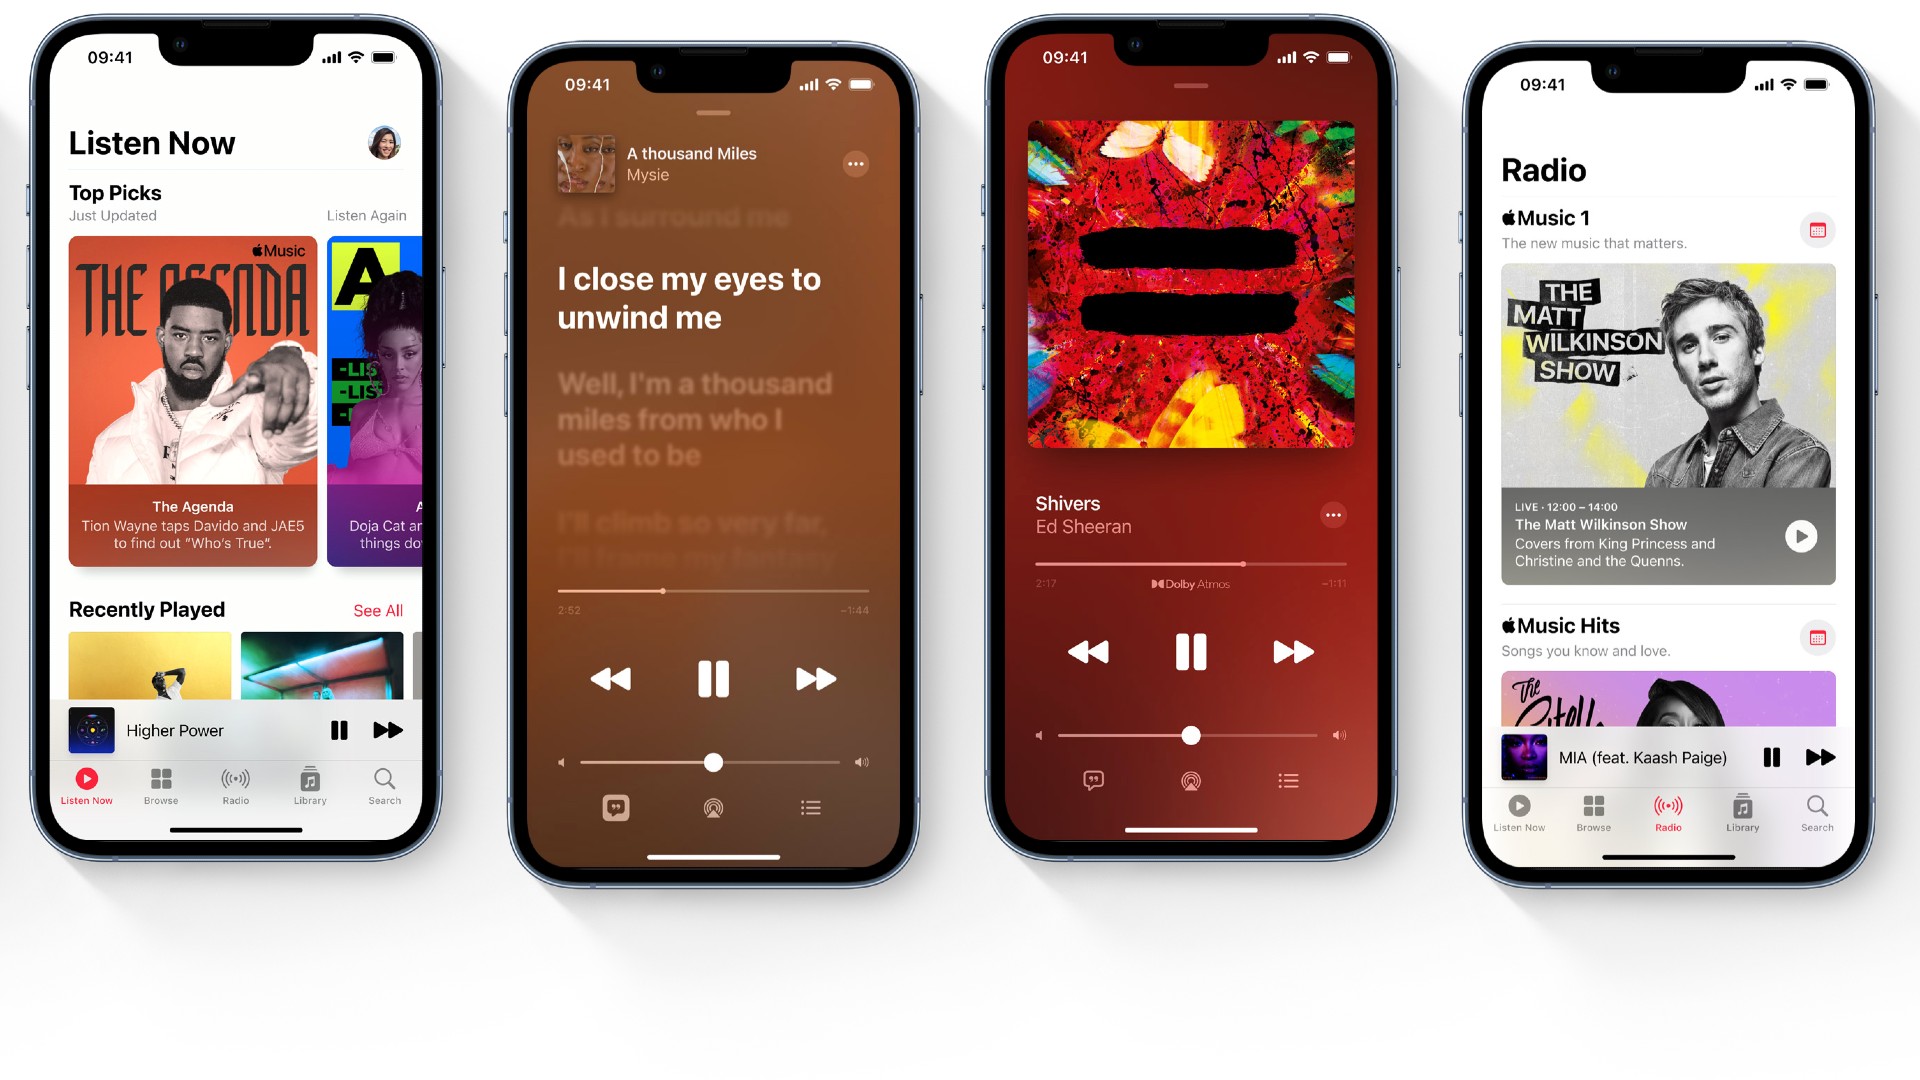 How to Fix Low Volume Issues in Apple Music? 1